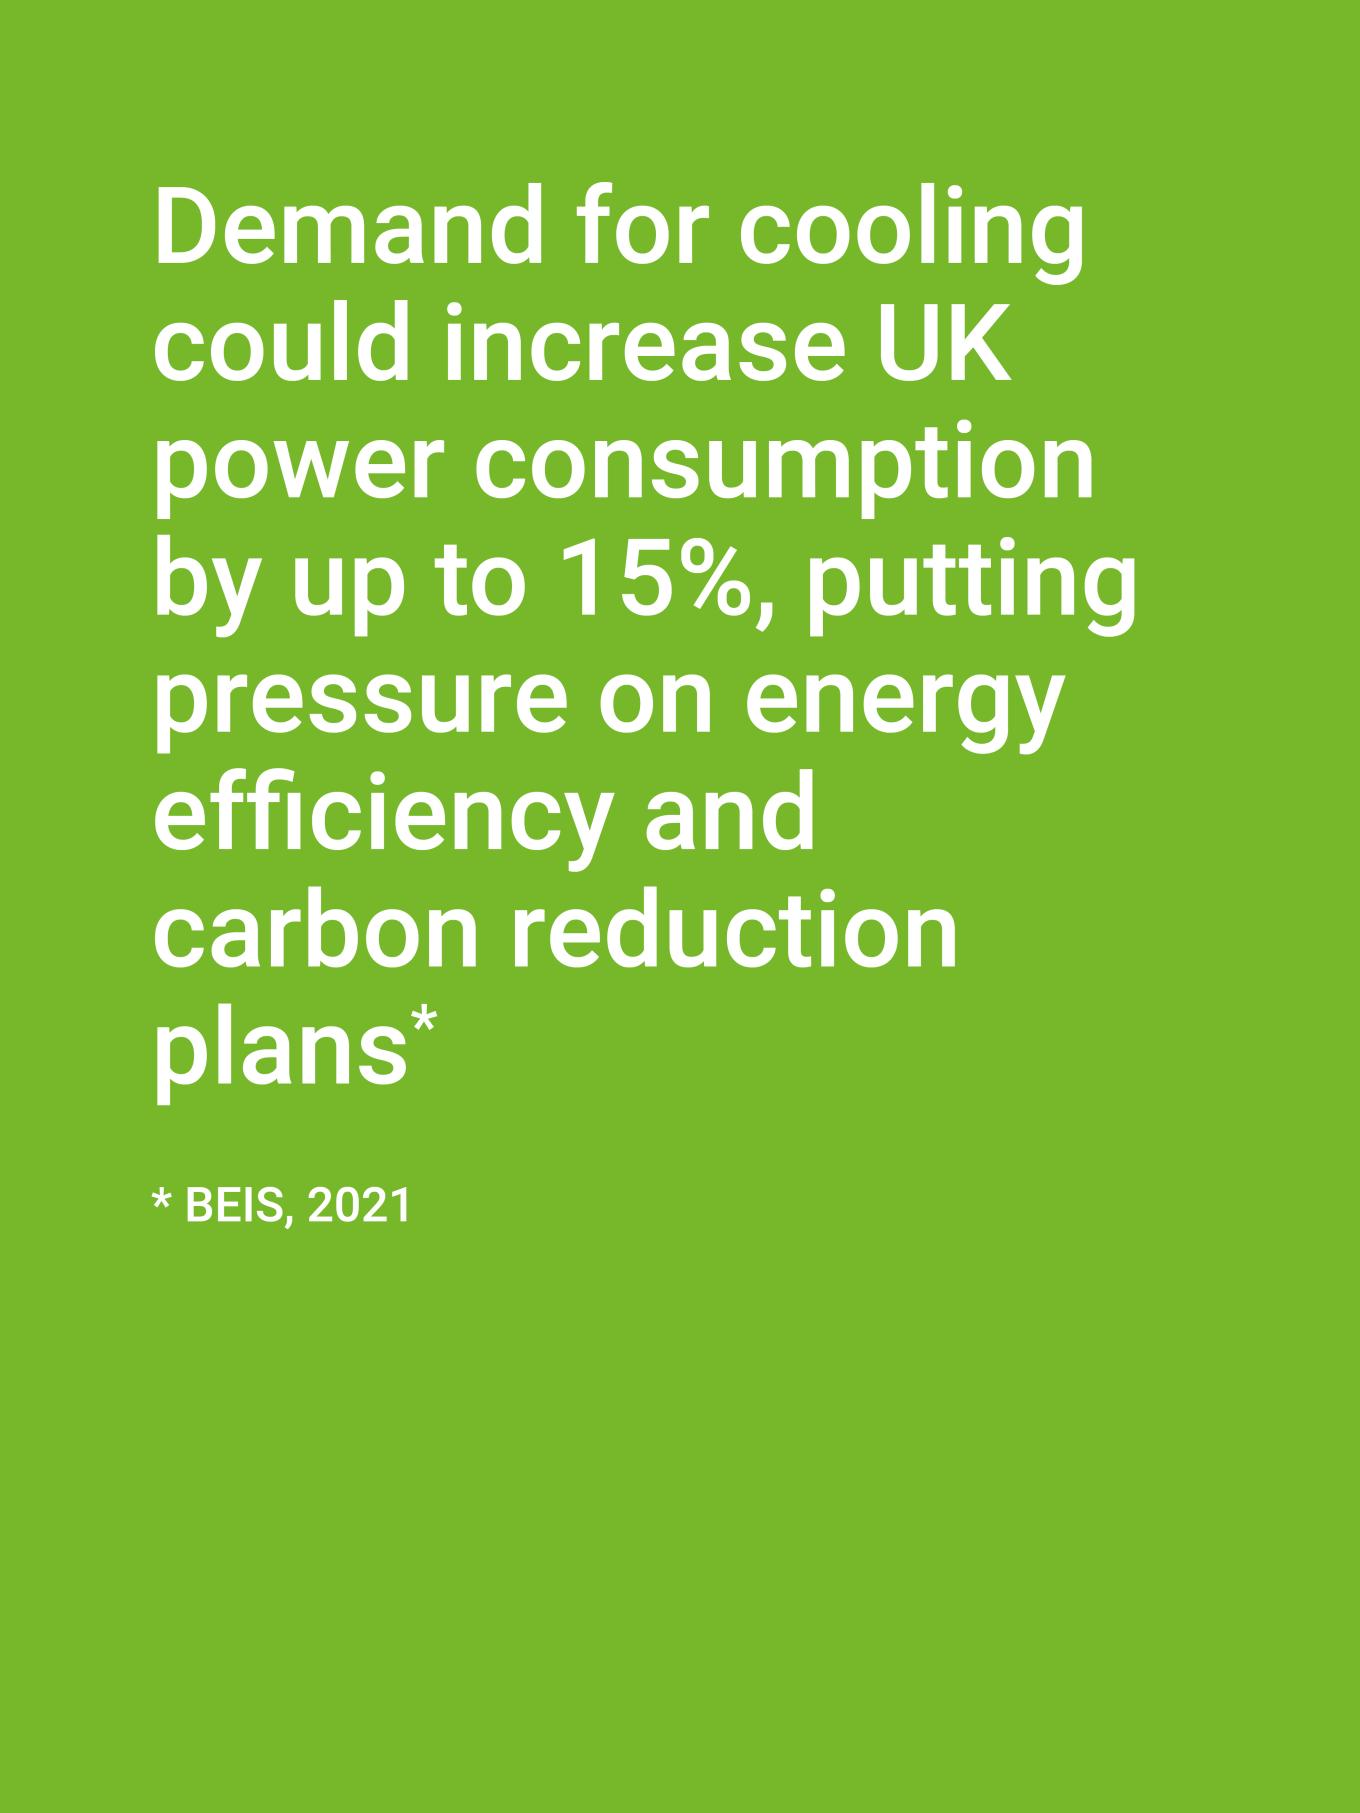 Increase in UK power consumption